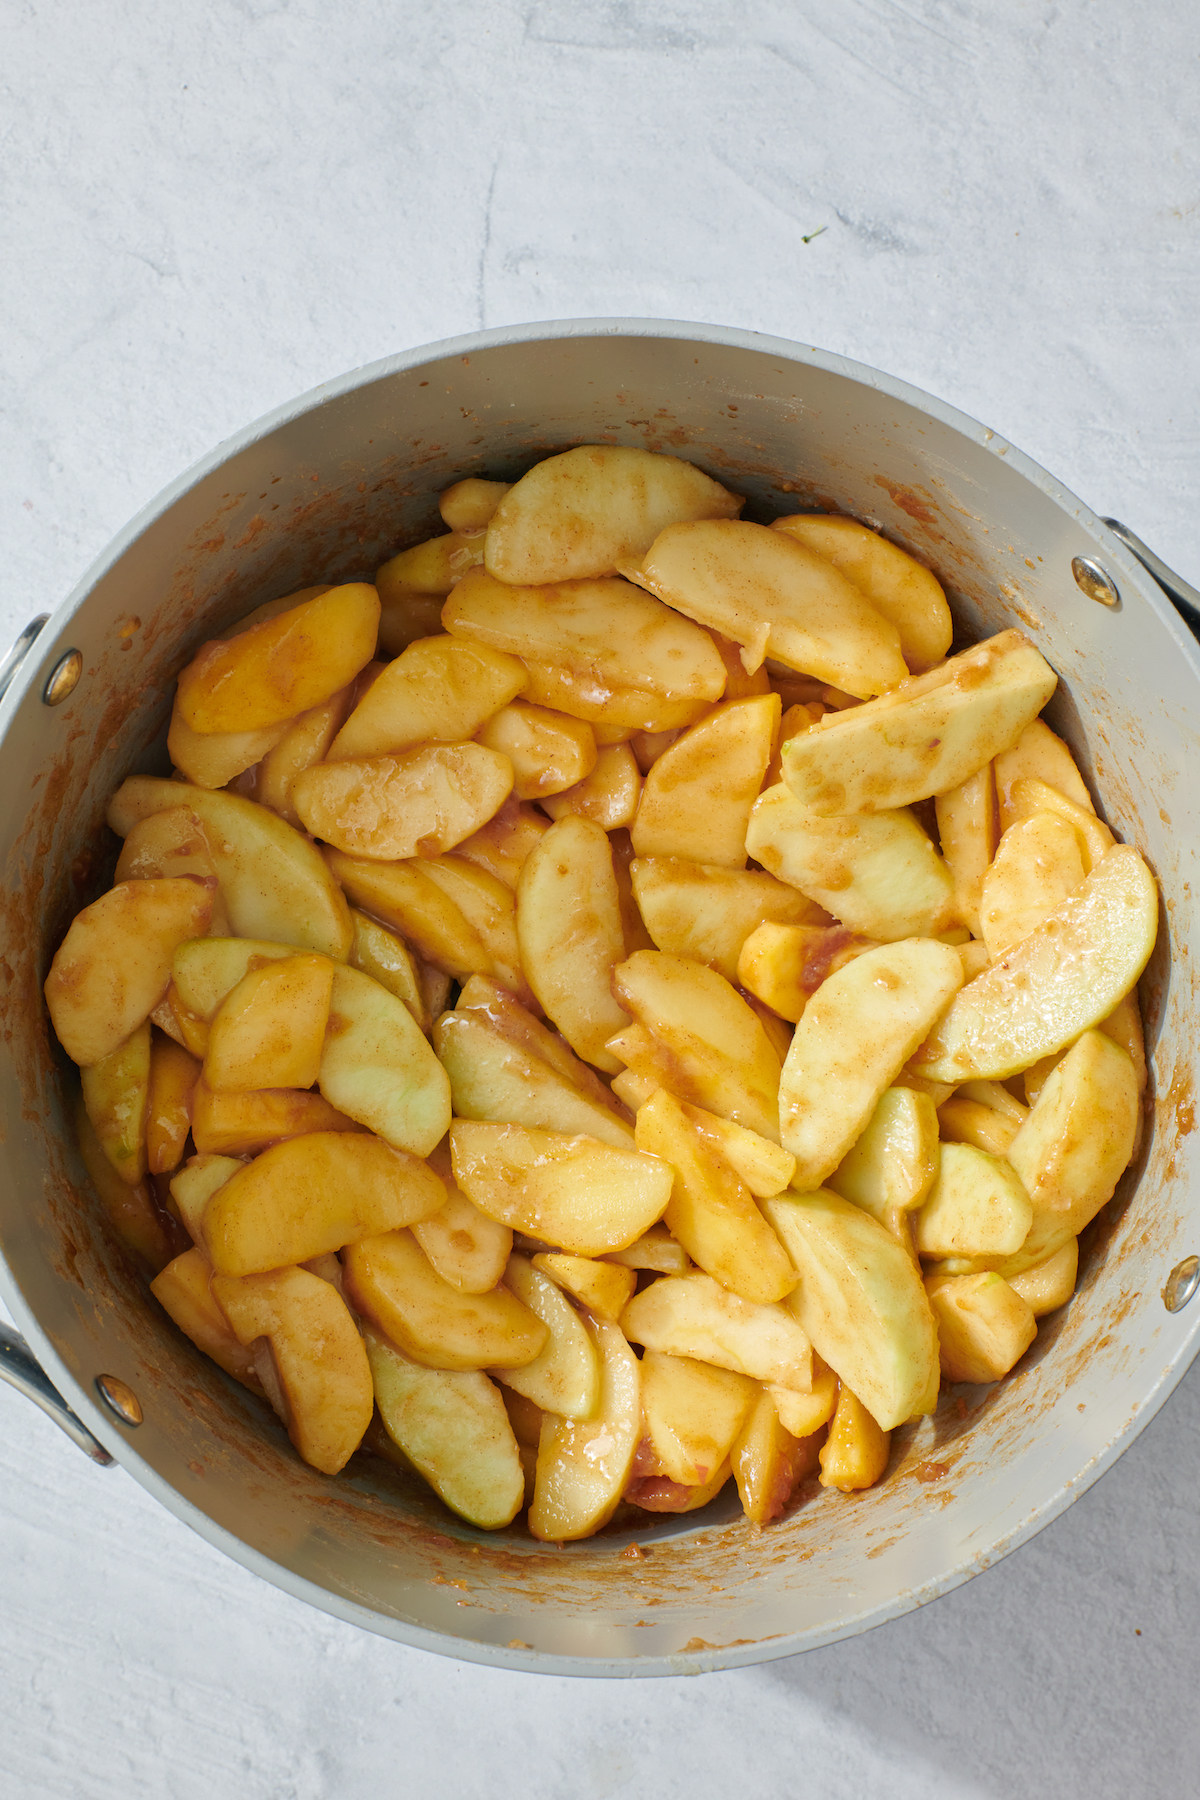 Sautéed apples with cinnamon and other ingredients.